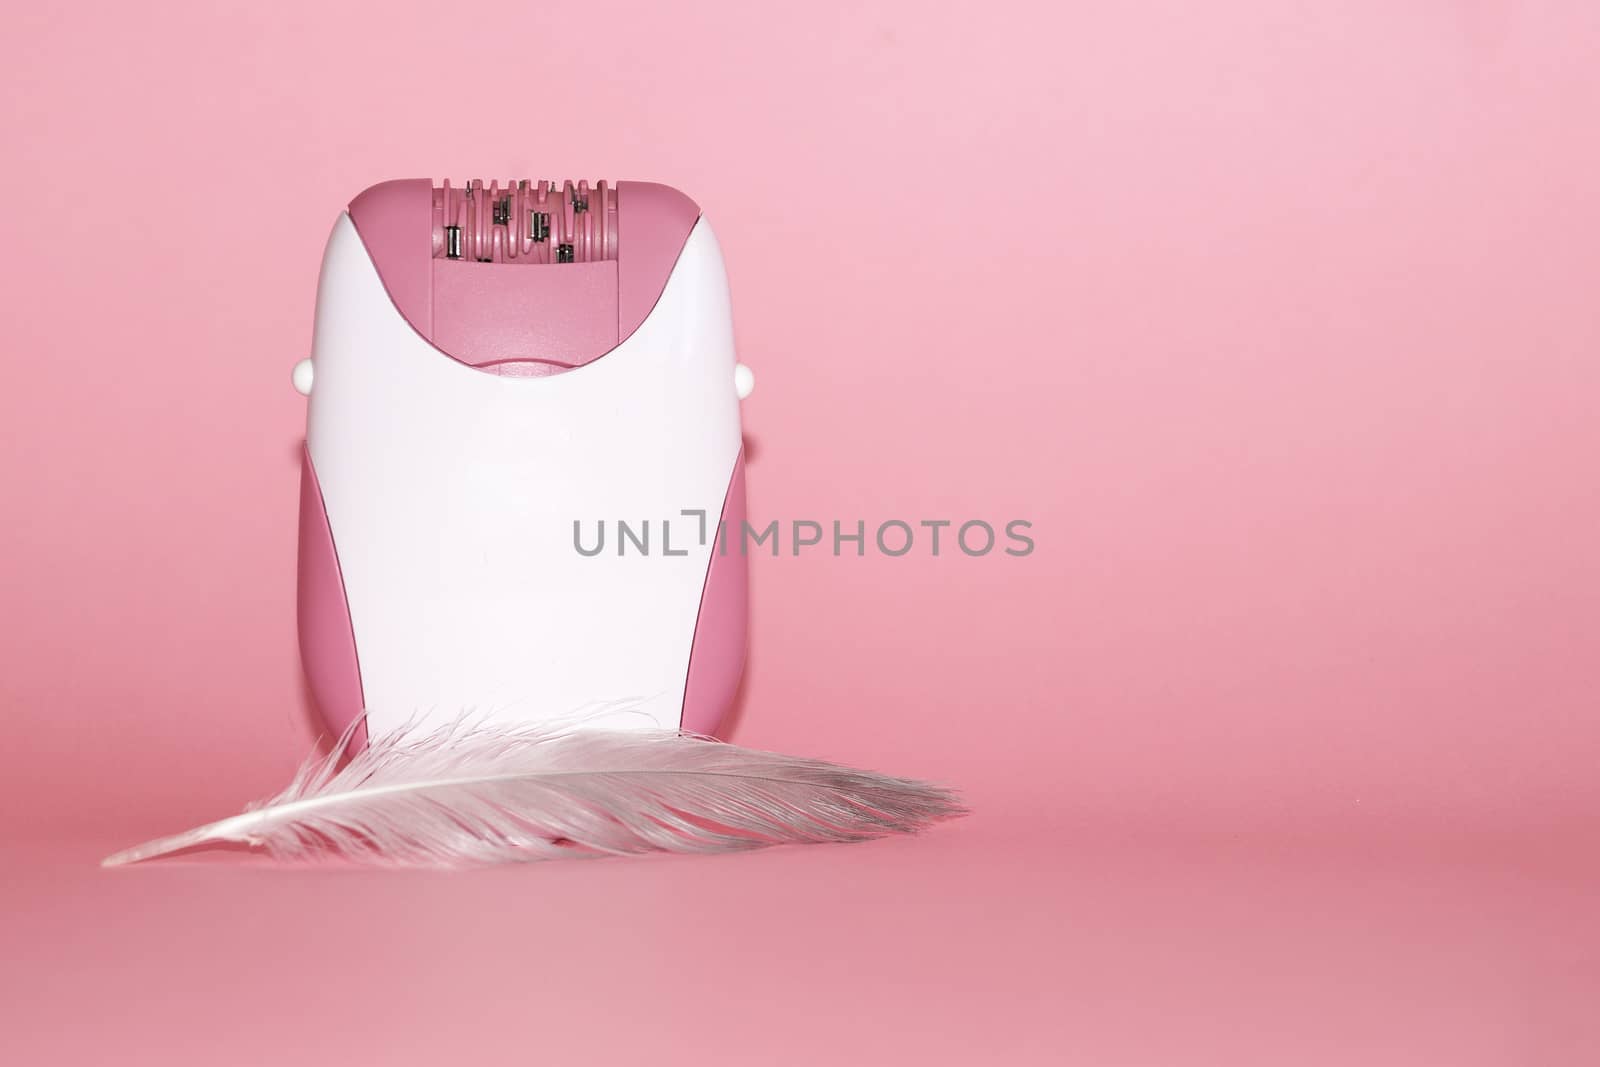 electric handheld epilator and feather on pink background close-up